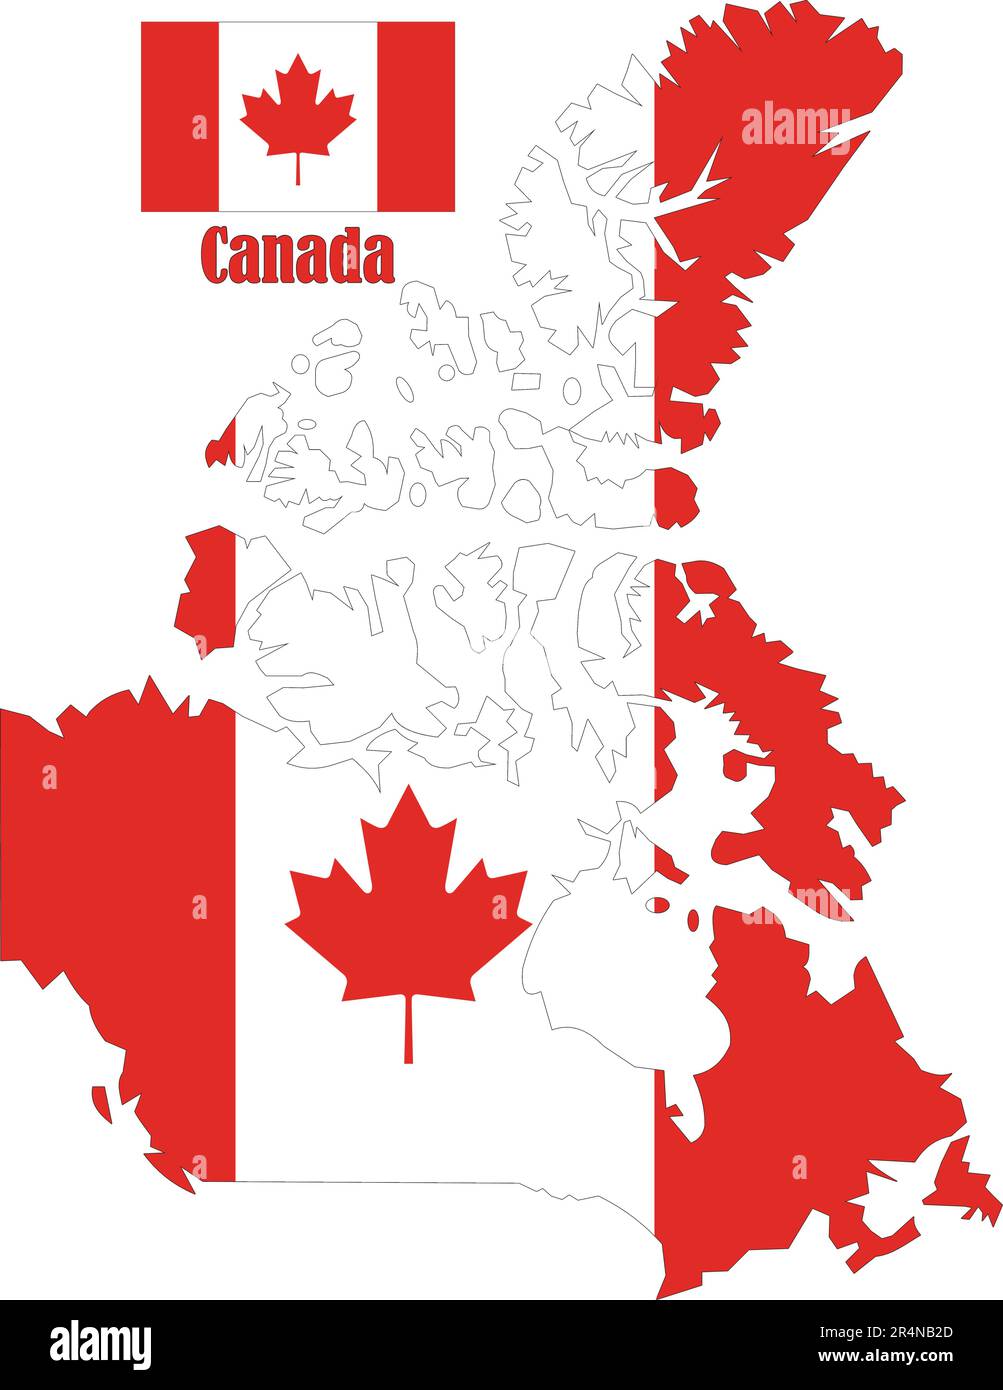 Canada Map and Flag Stock Vector